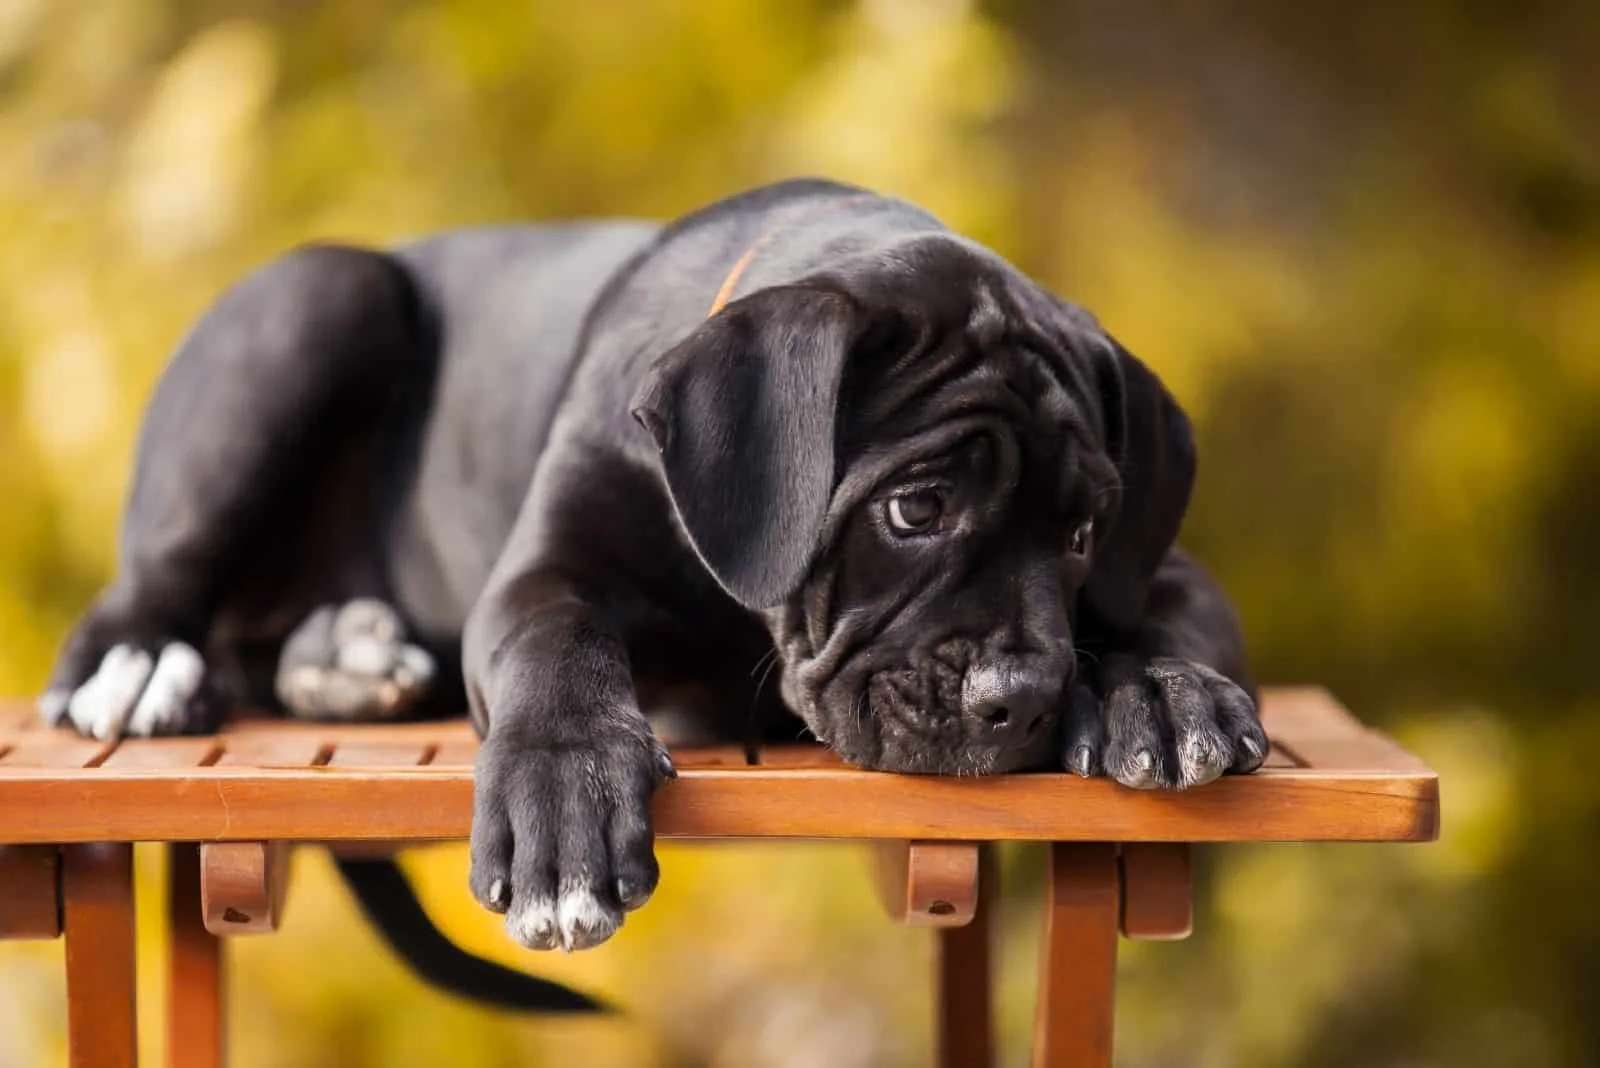 cane corso puppy lying on a wooden bench outdoors 